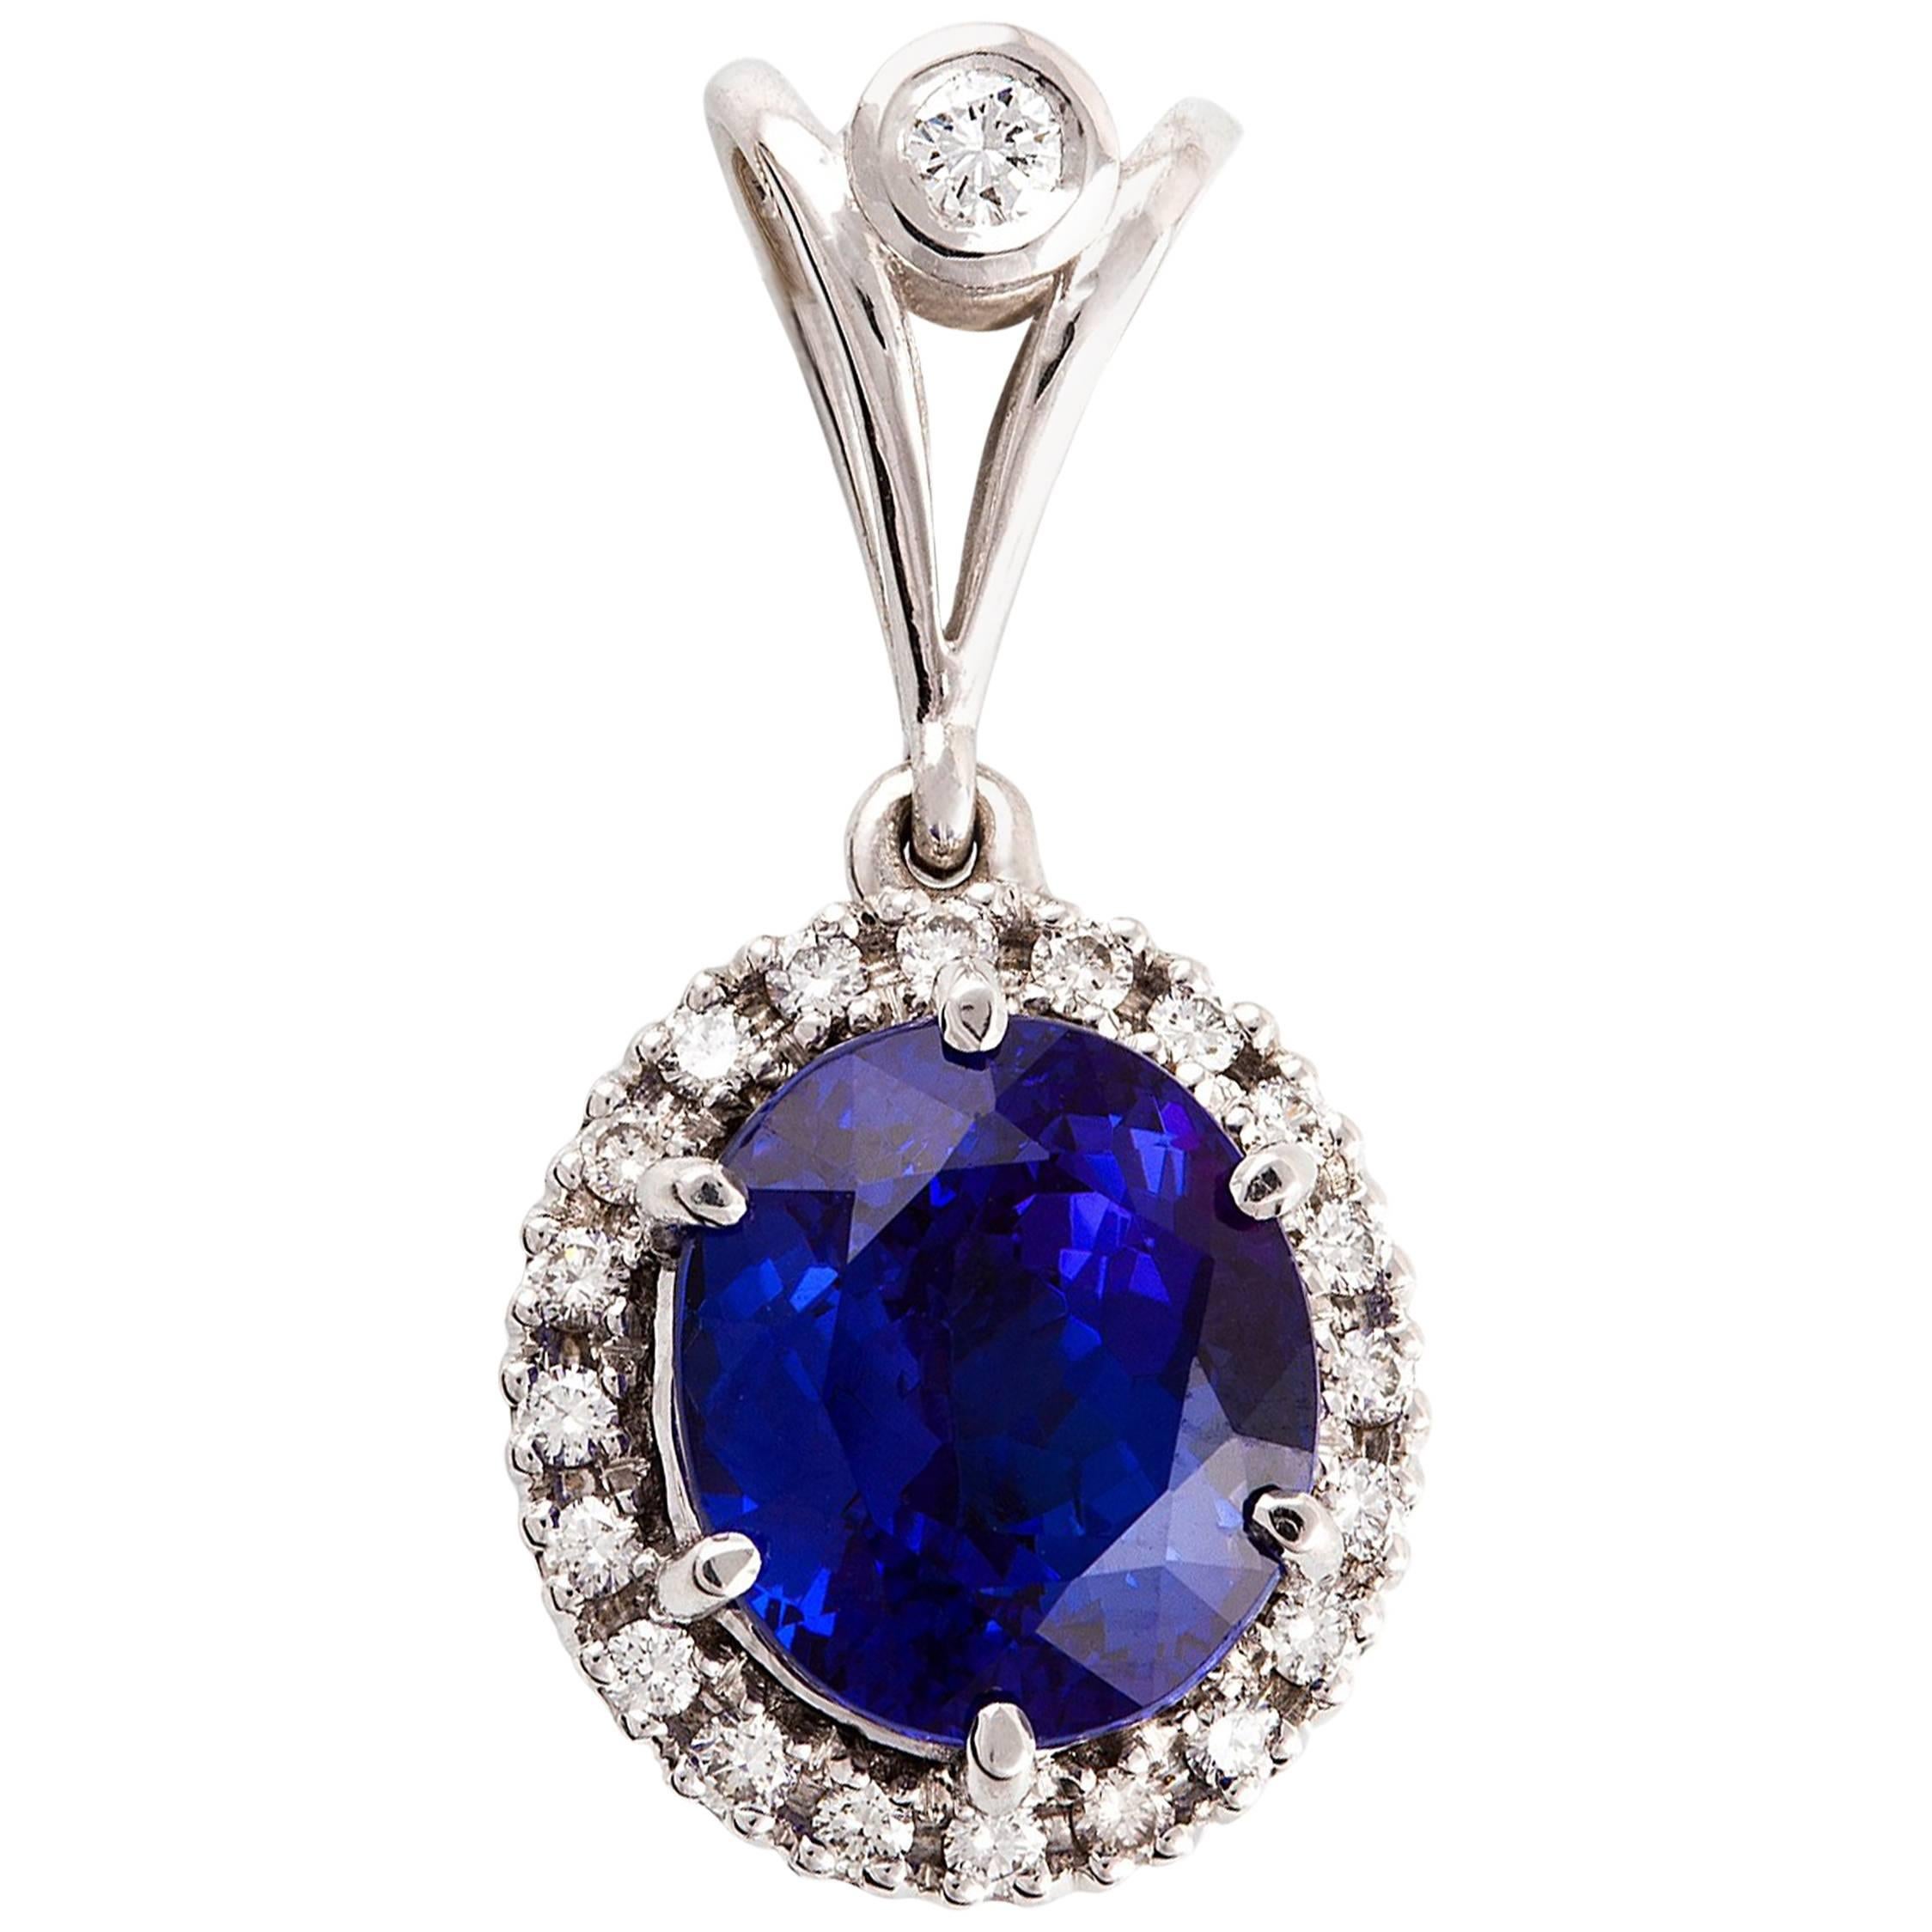 Women's 6.30 Carat Tanzanite and Diamond Necklace in 18 Carat White Gold BY Kian Design For Sale